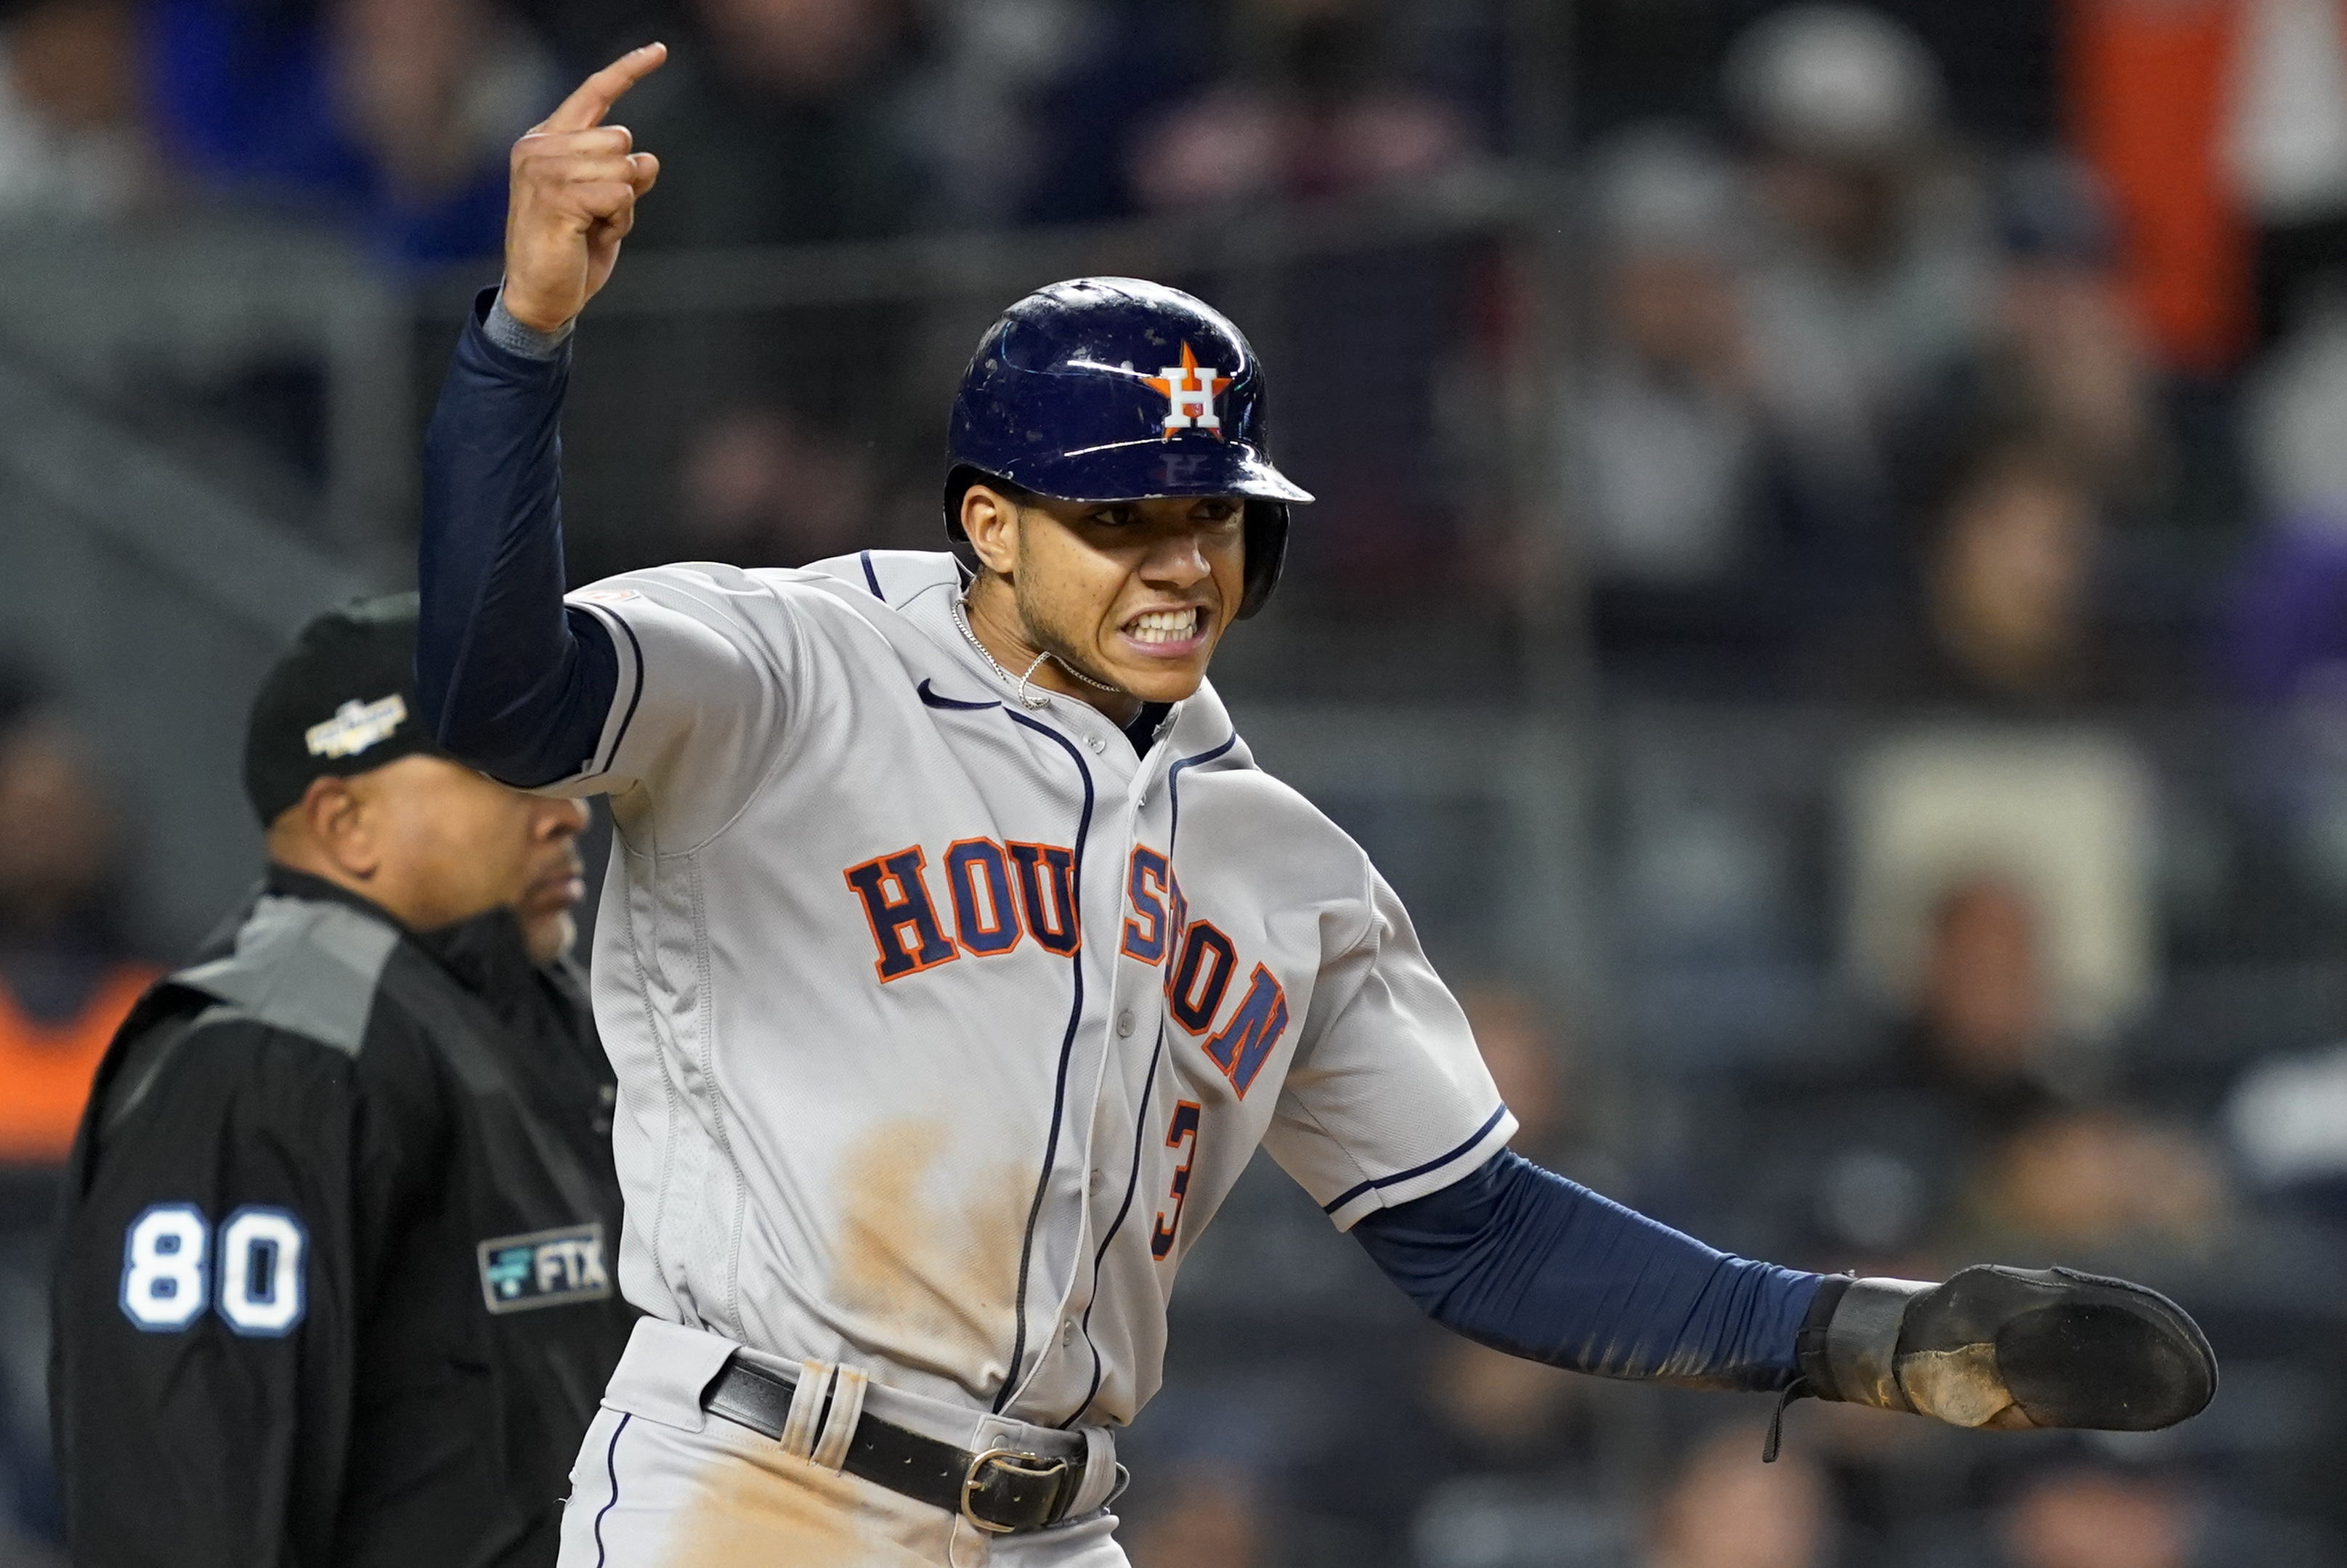 Reacting to the New York Yankees being swept by the Houston Astros 